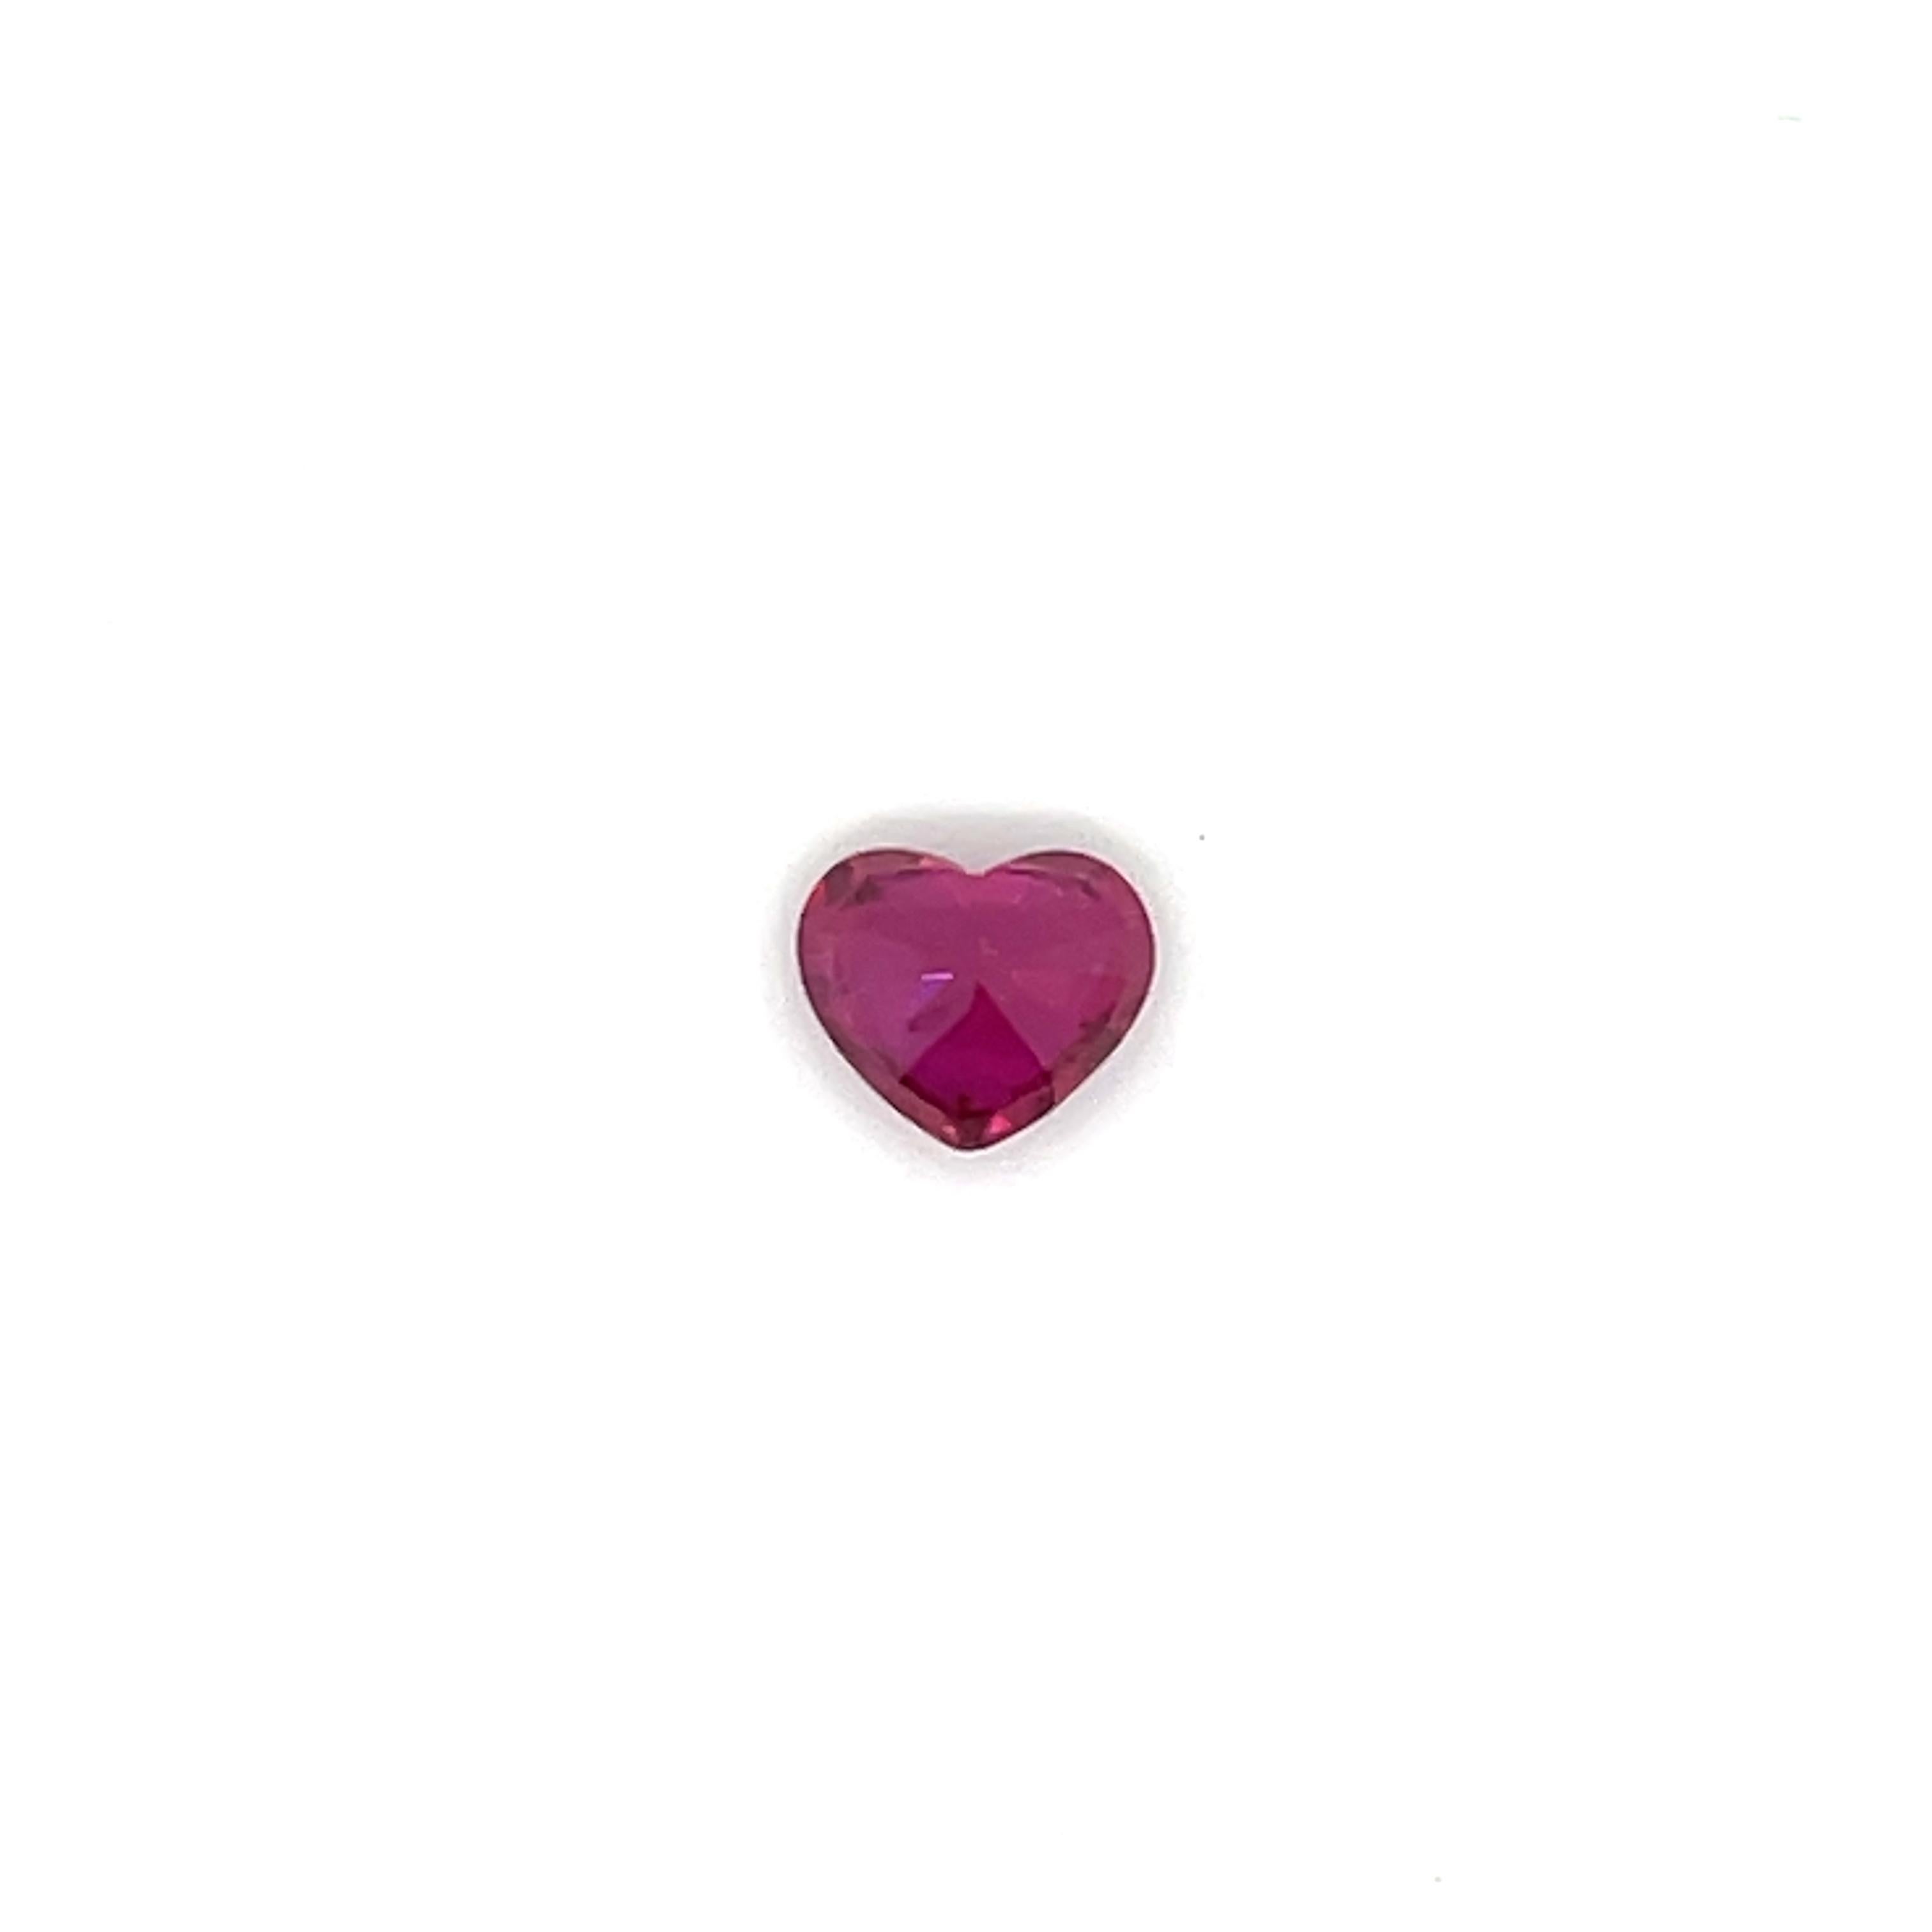 Heart-Shaped Ruby Cts 1.27 For Sale